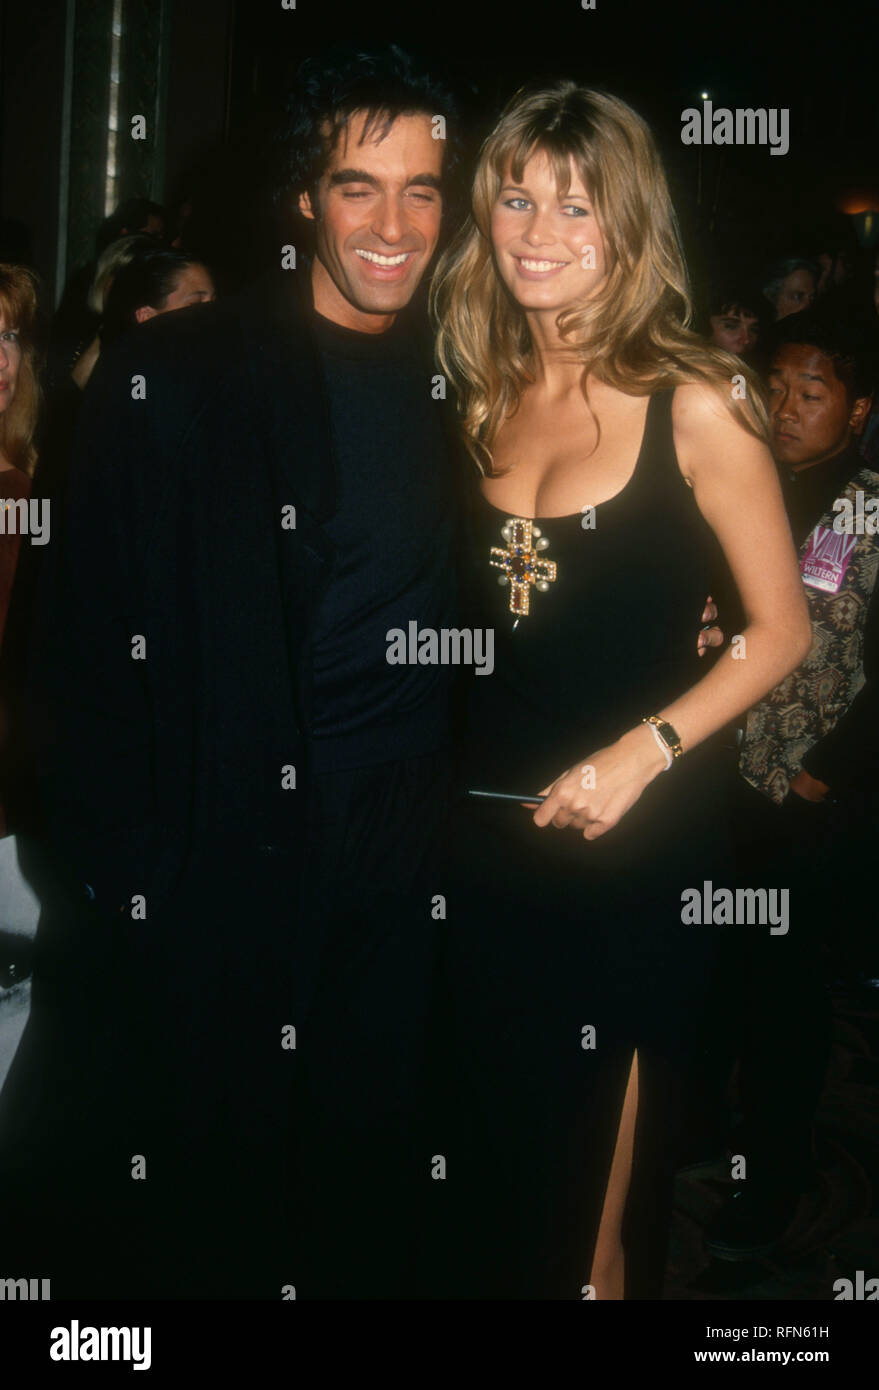 LOS ANGELES, CA - NOVEMBER 10: Magician David Copperfield and model Claudia Schiffer attend David Copperfield's Magic Show to Benefit the Starlight Children's Foundation on on November 10, 1993 at the Wiltern Theatre in Los Angeles, California. Photo by Barry King/Alamy Stock Photo Stock Photo